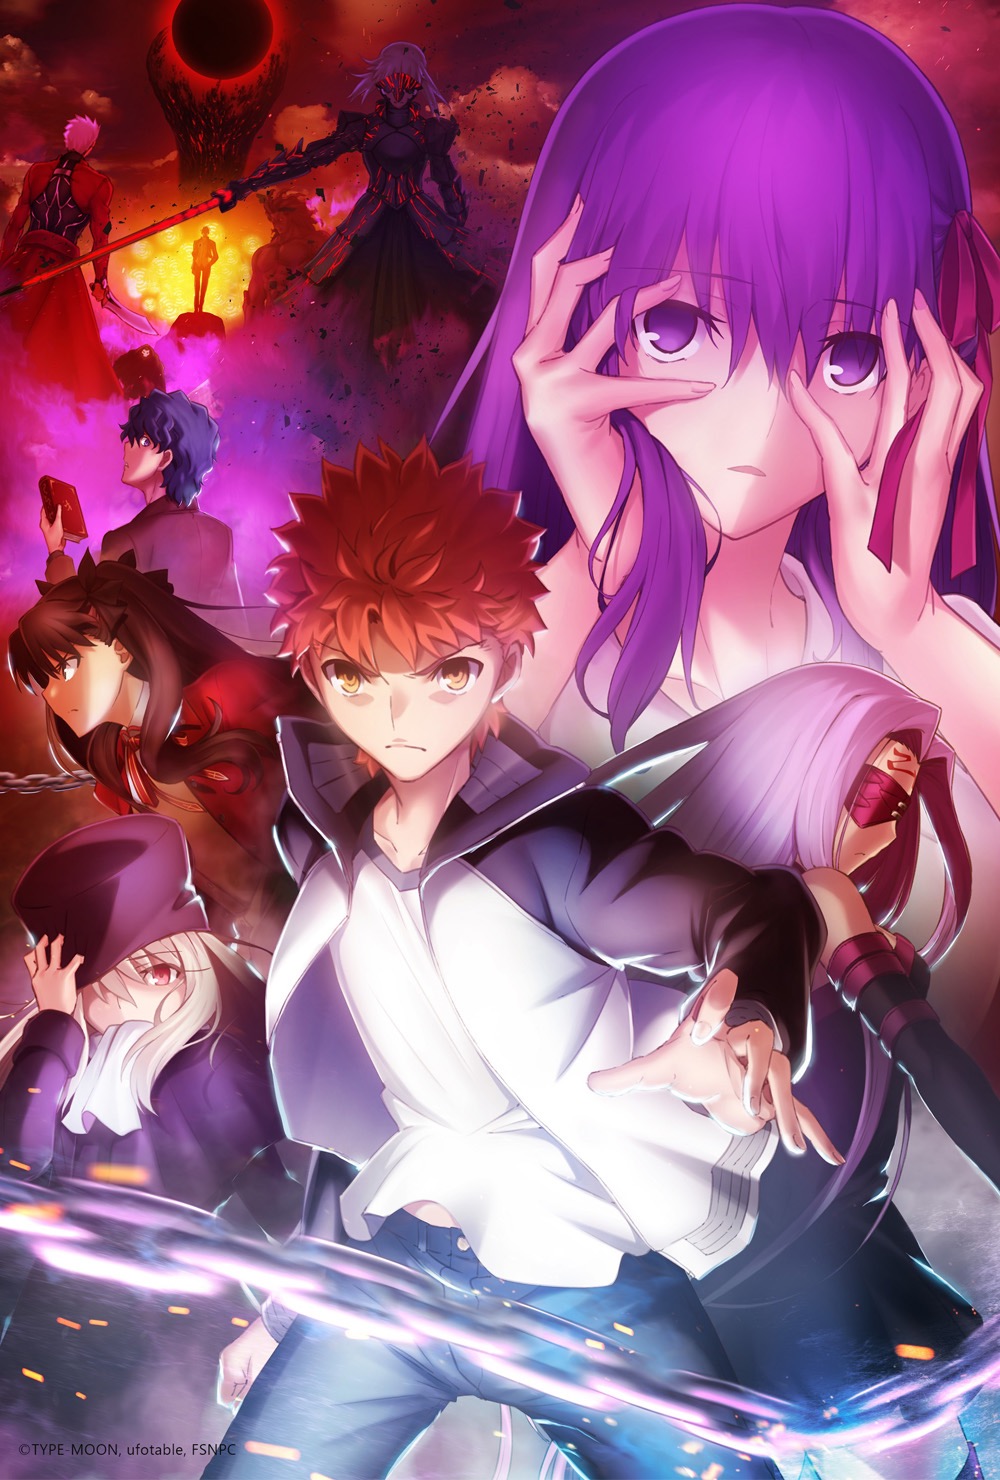 Fate Stay Night: The Three Routes – Anime Reviews and Lots of Other Stuff!